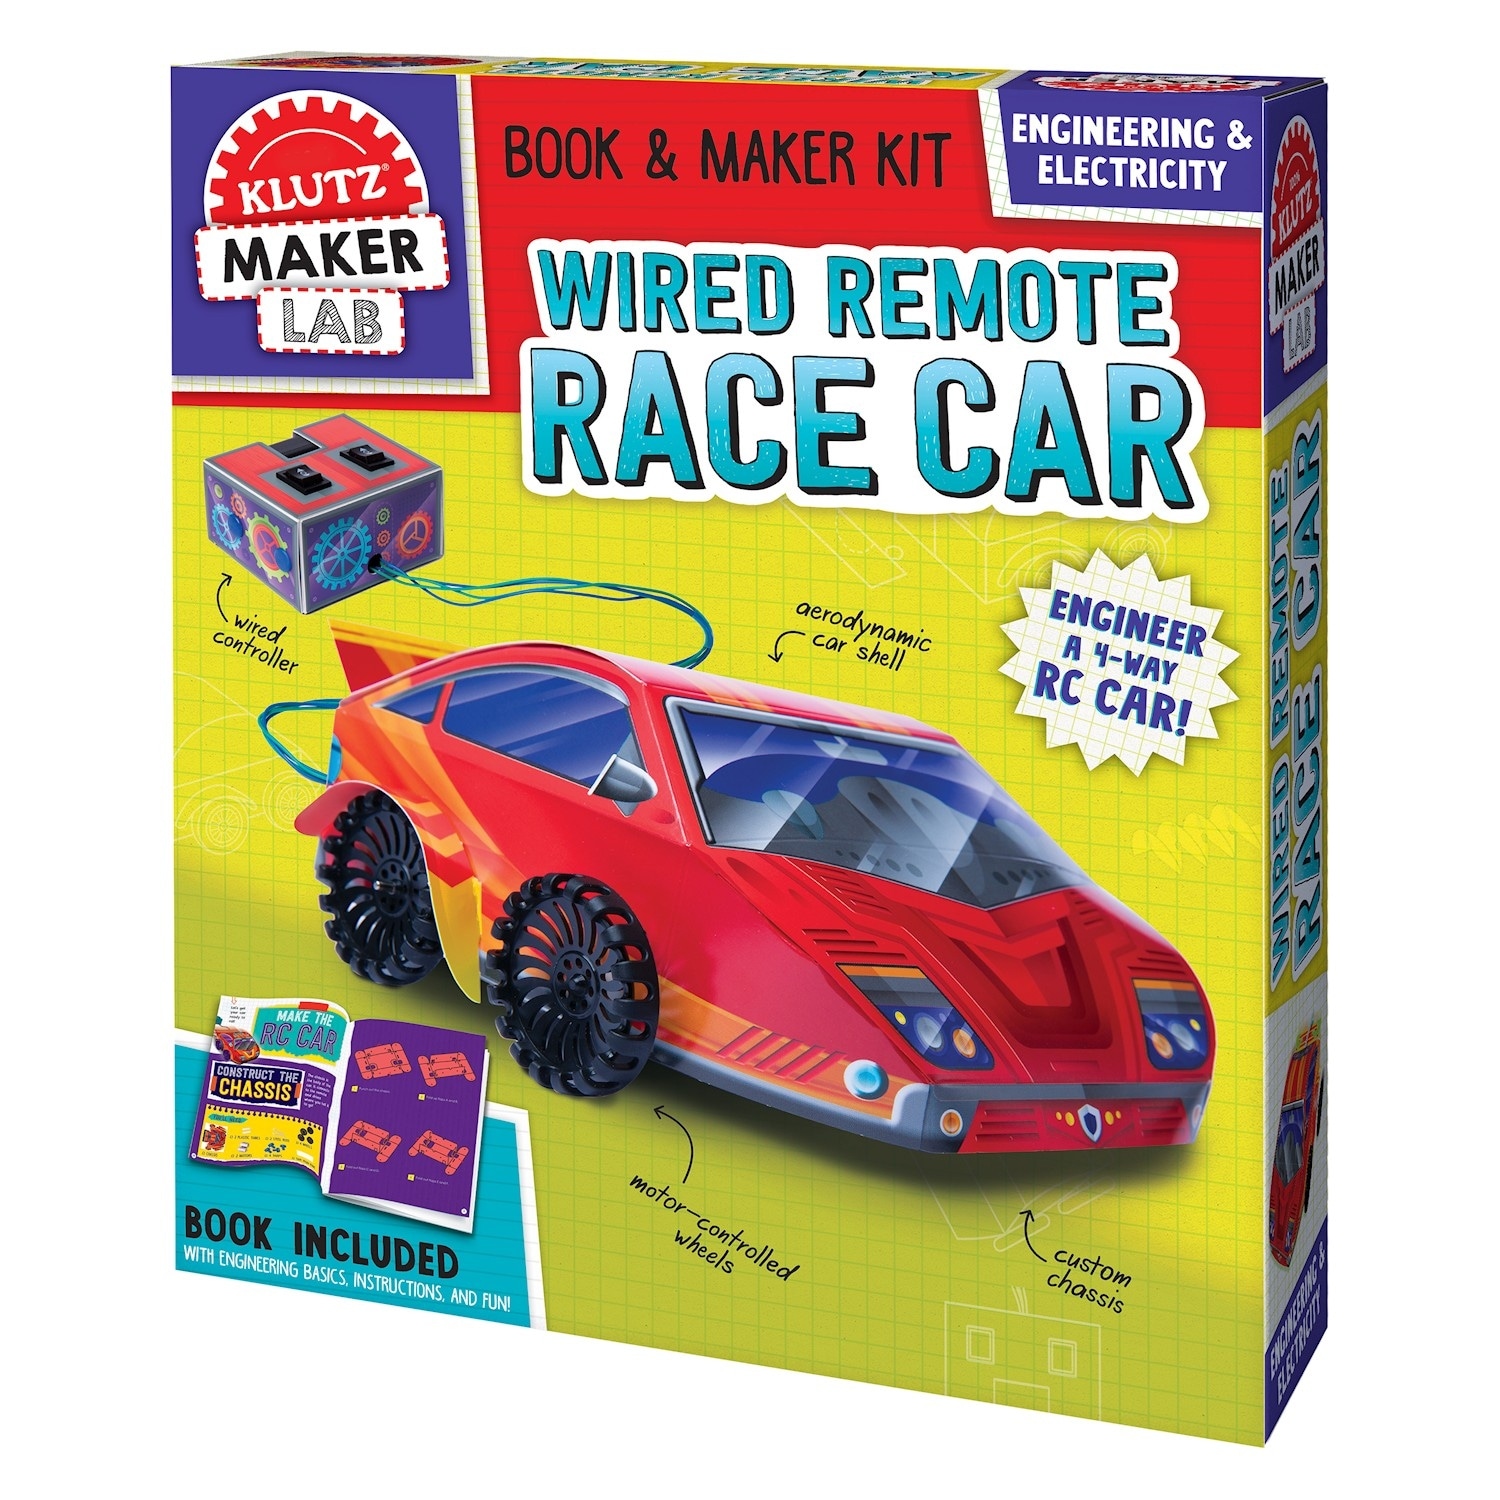 Download Klutz Maker Lab Racecar Kit Diy Wired Remote Controlled 4 Way Race Car Building S T E M Contruction Set Toy On Sale Overstock 29797968